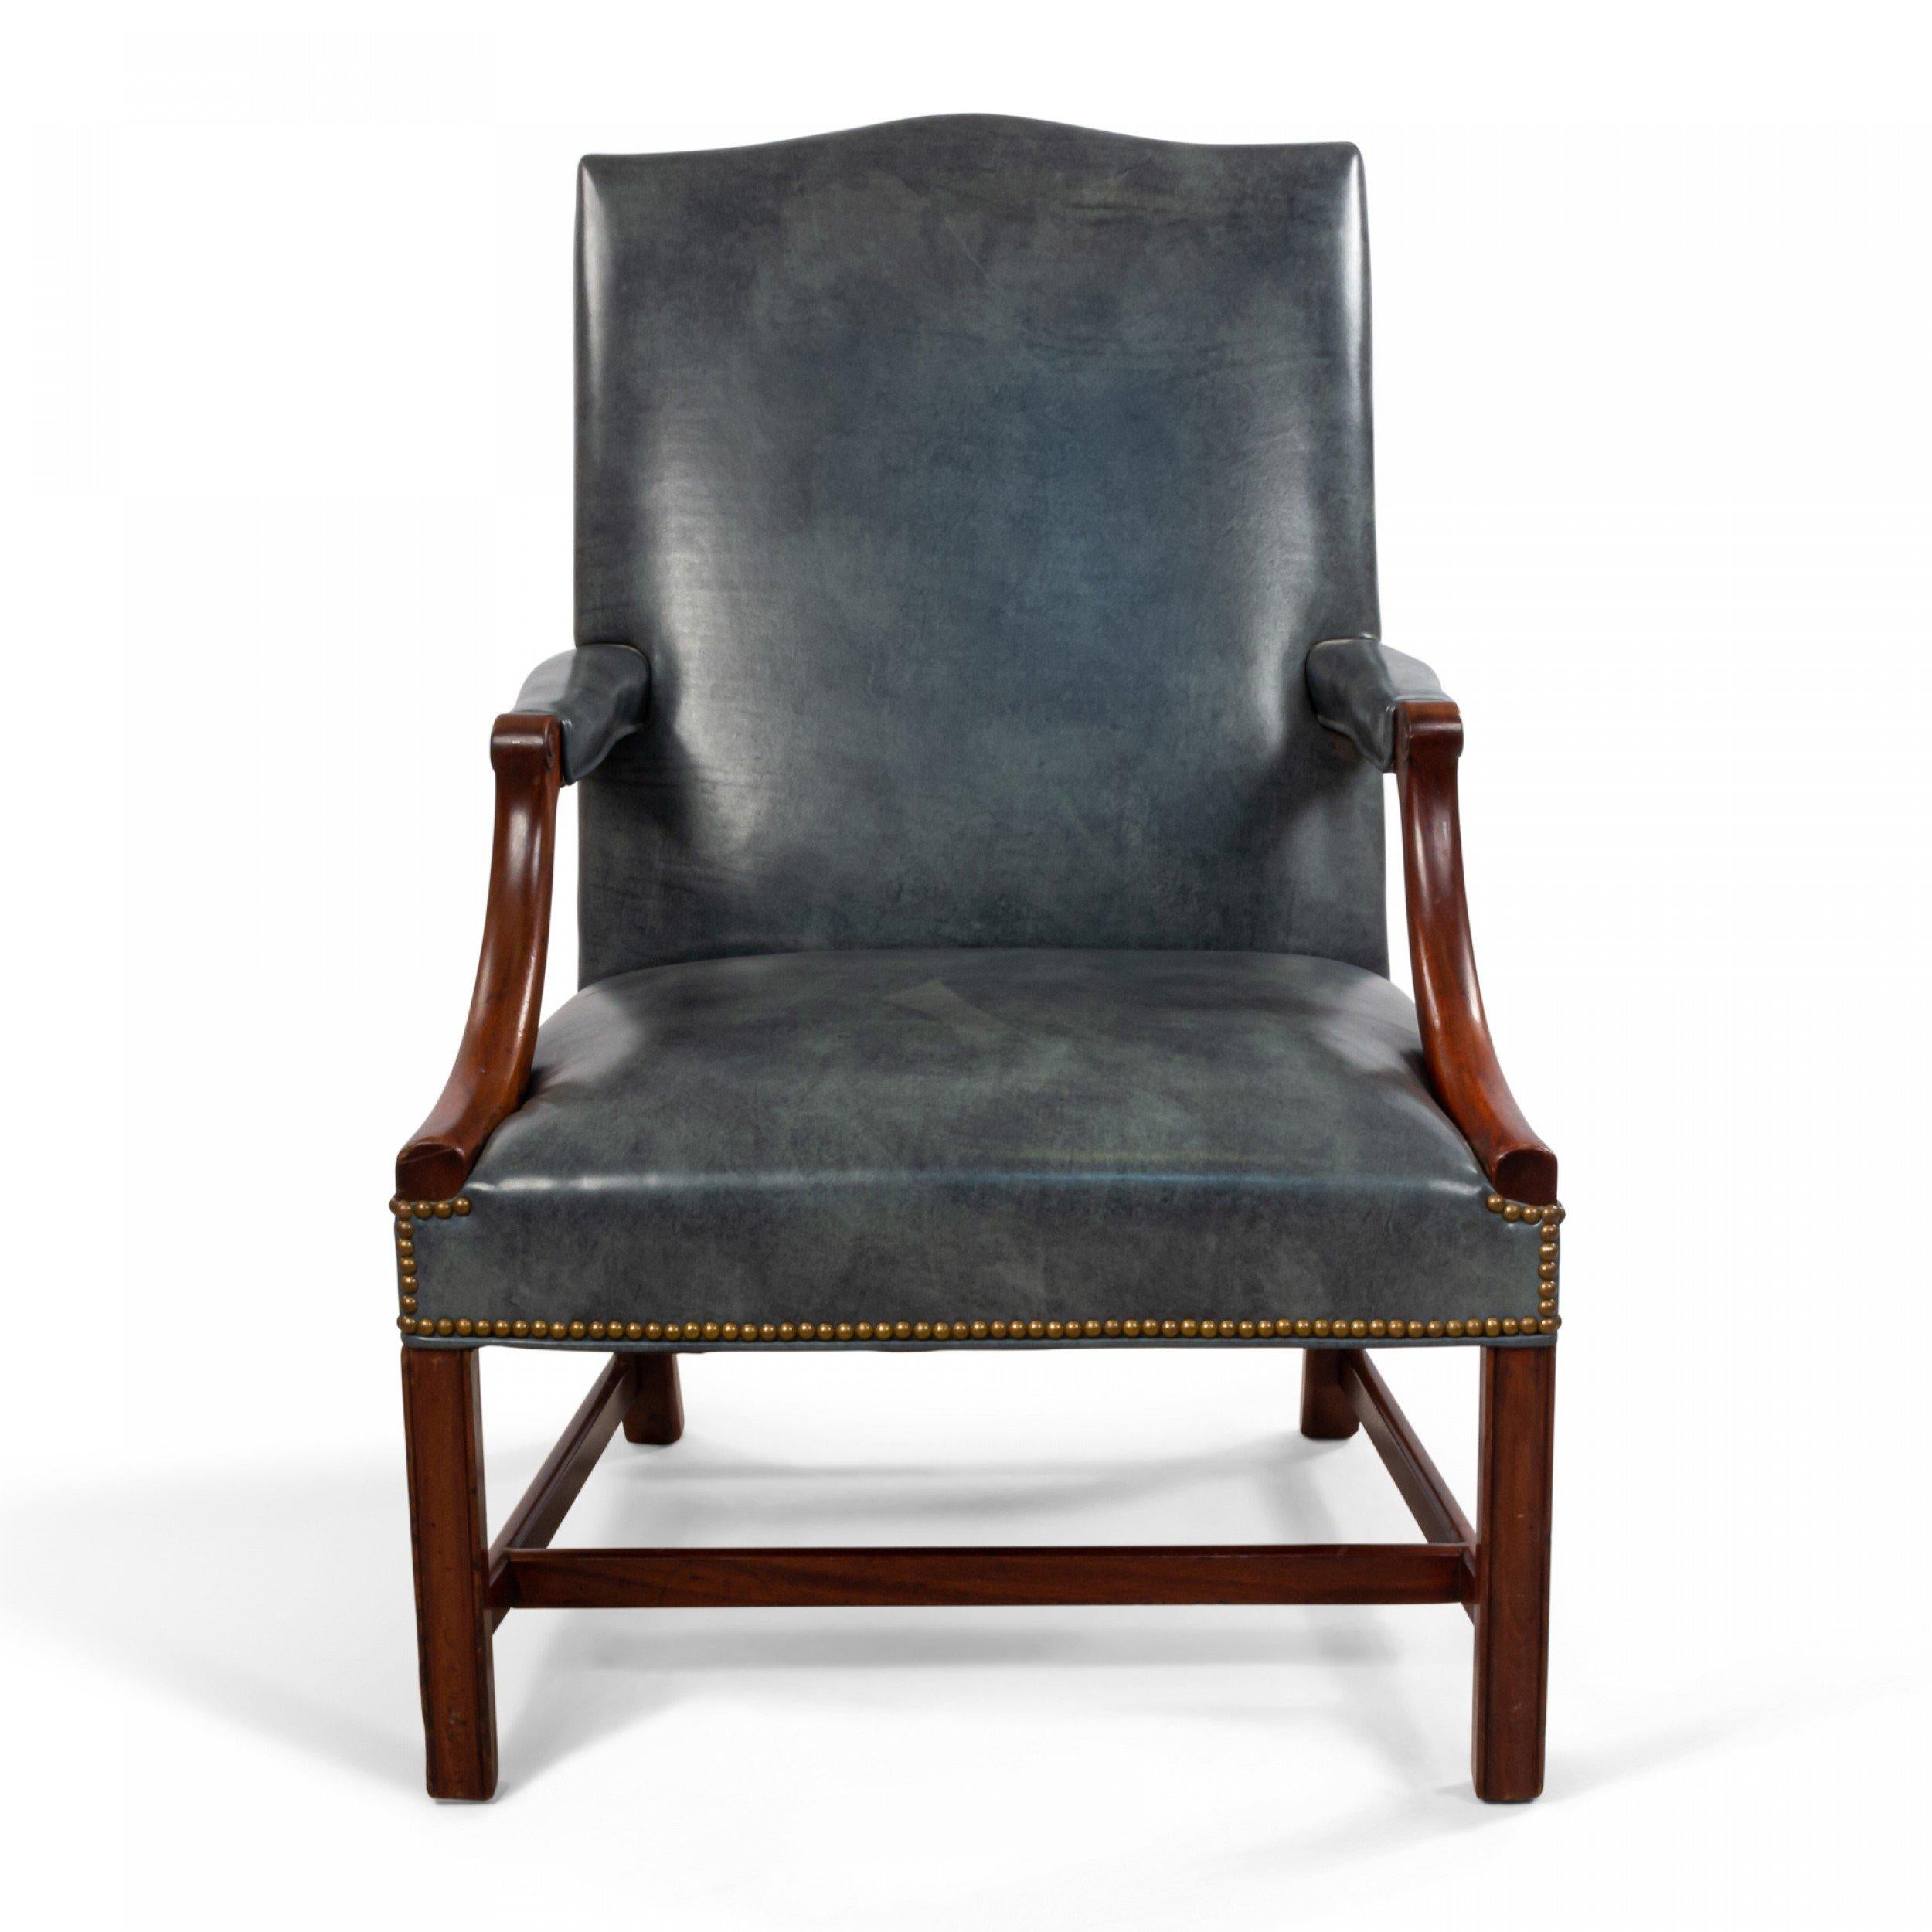 English Georgian style (20th century) mahogany open armchair with shaped back and upholstered in a leather style blue/grey.